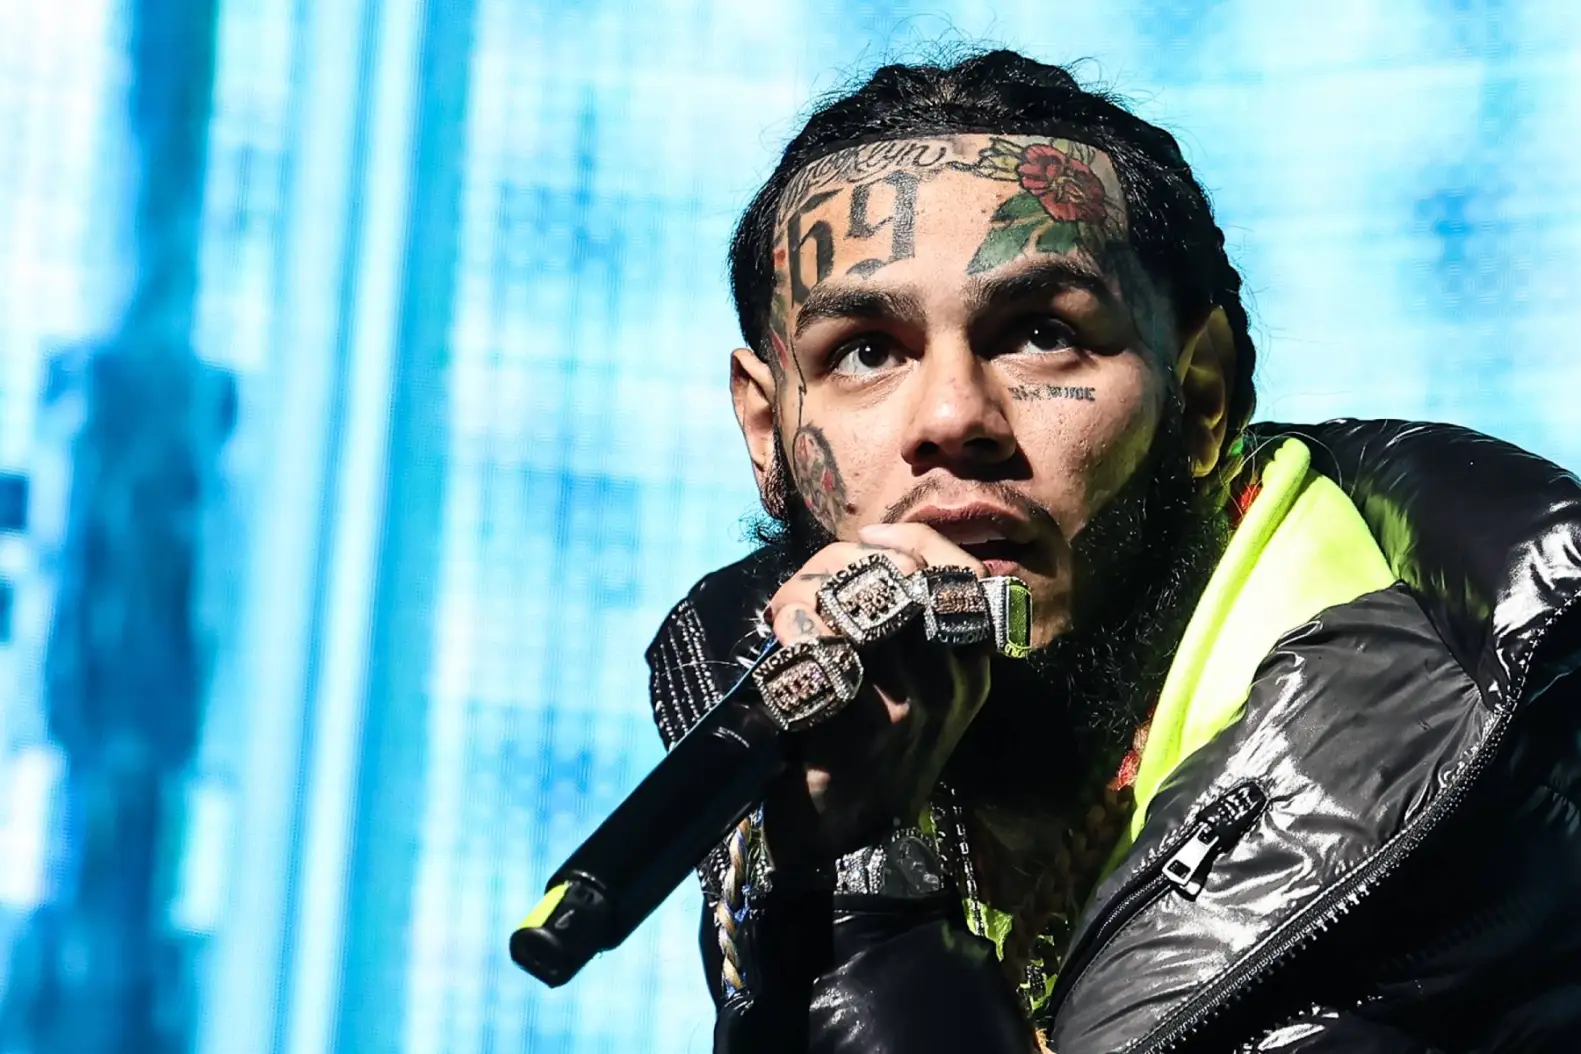 Tekashi 6ix9ine Facing His Bank Accounts Being Seized Over $120k Credit Card Debt Following Arrest in Dominican Republic